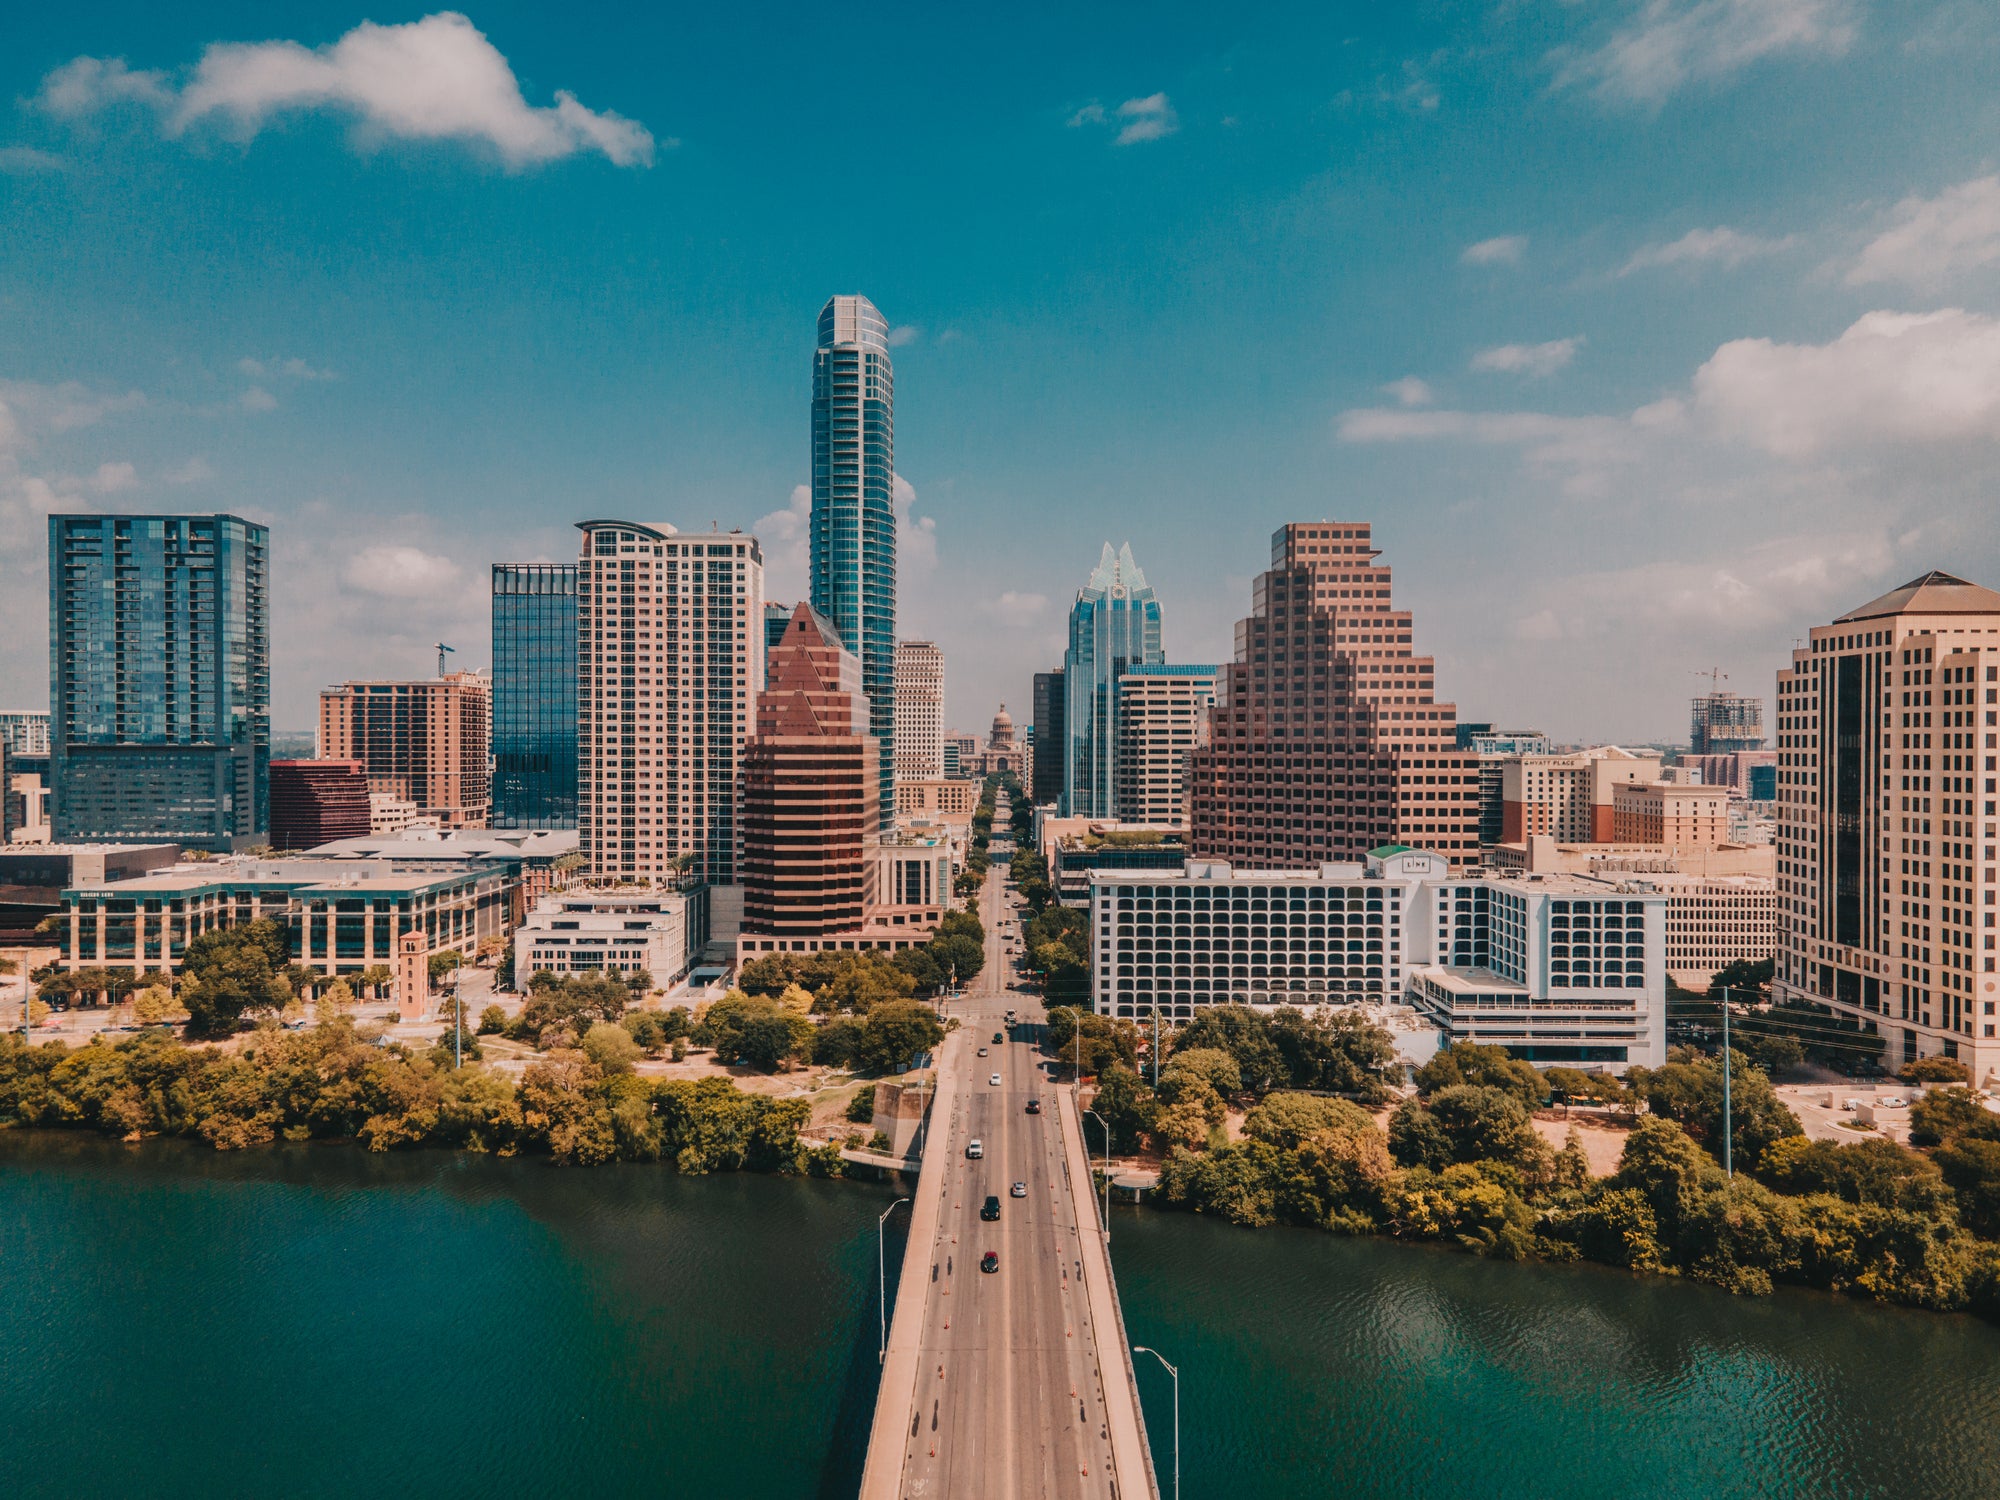 Saddle up for a solo trip to Austin, Texas